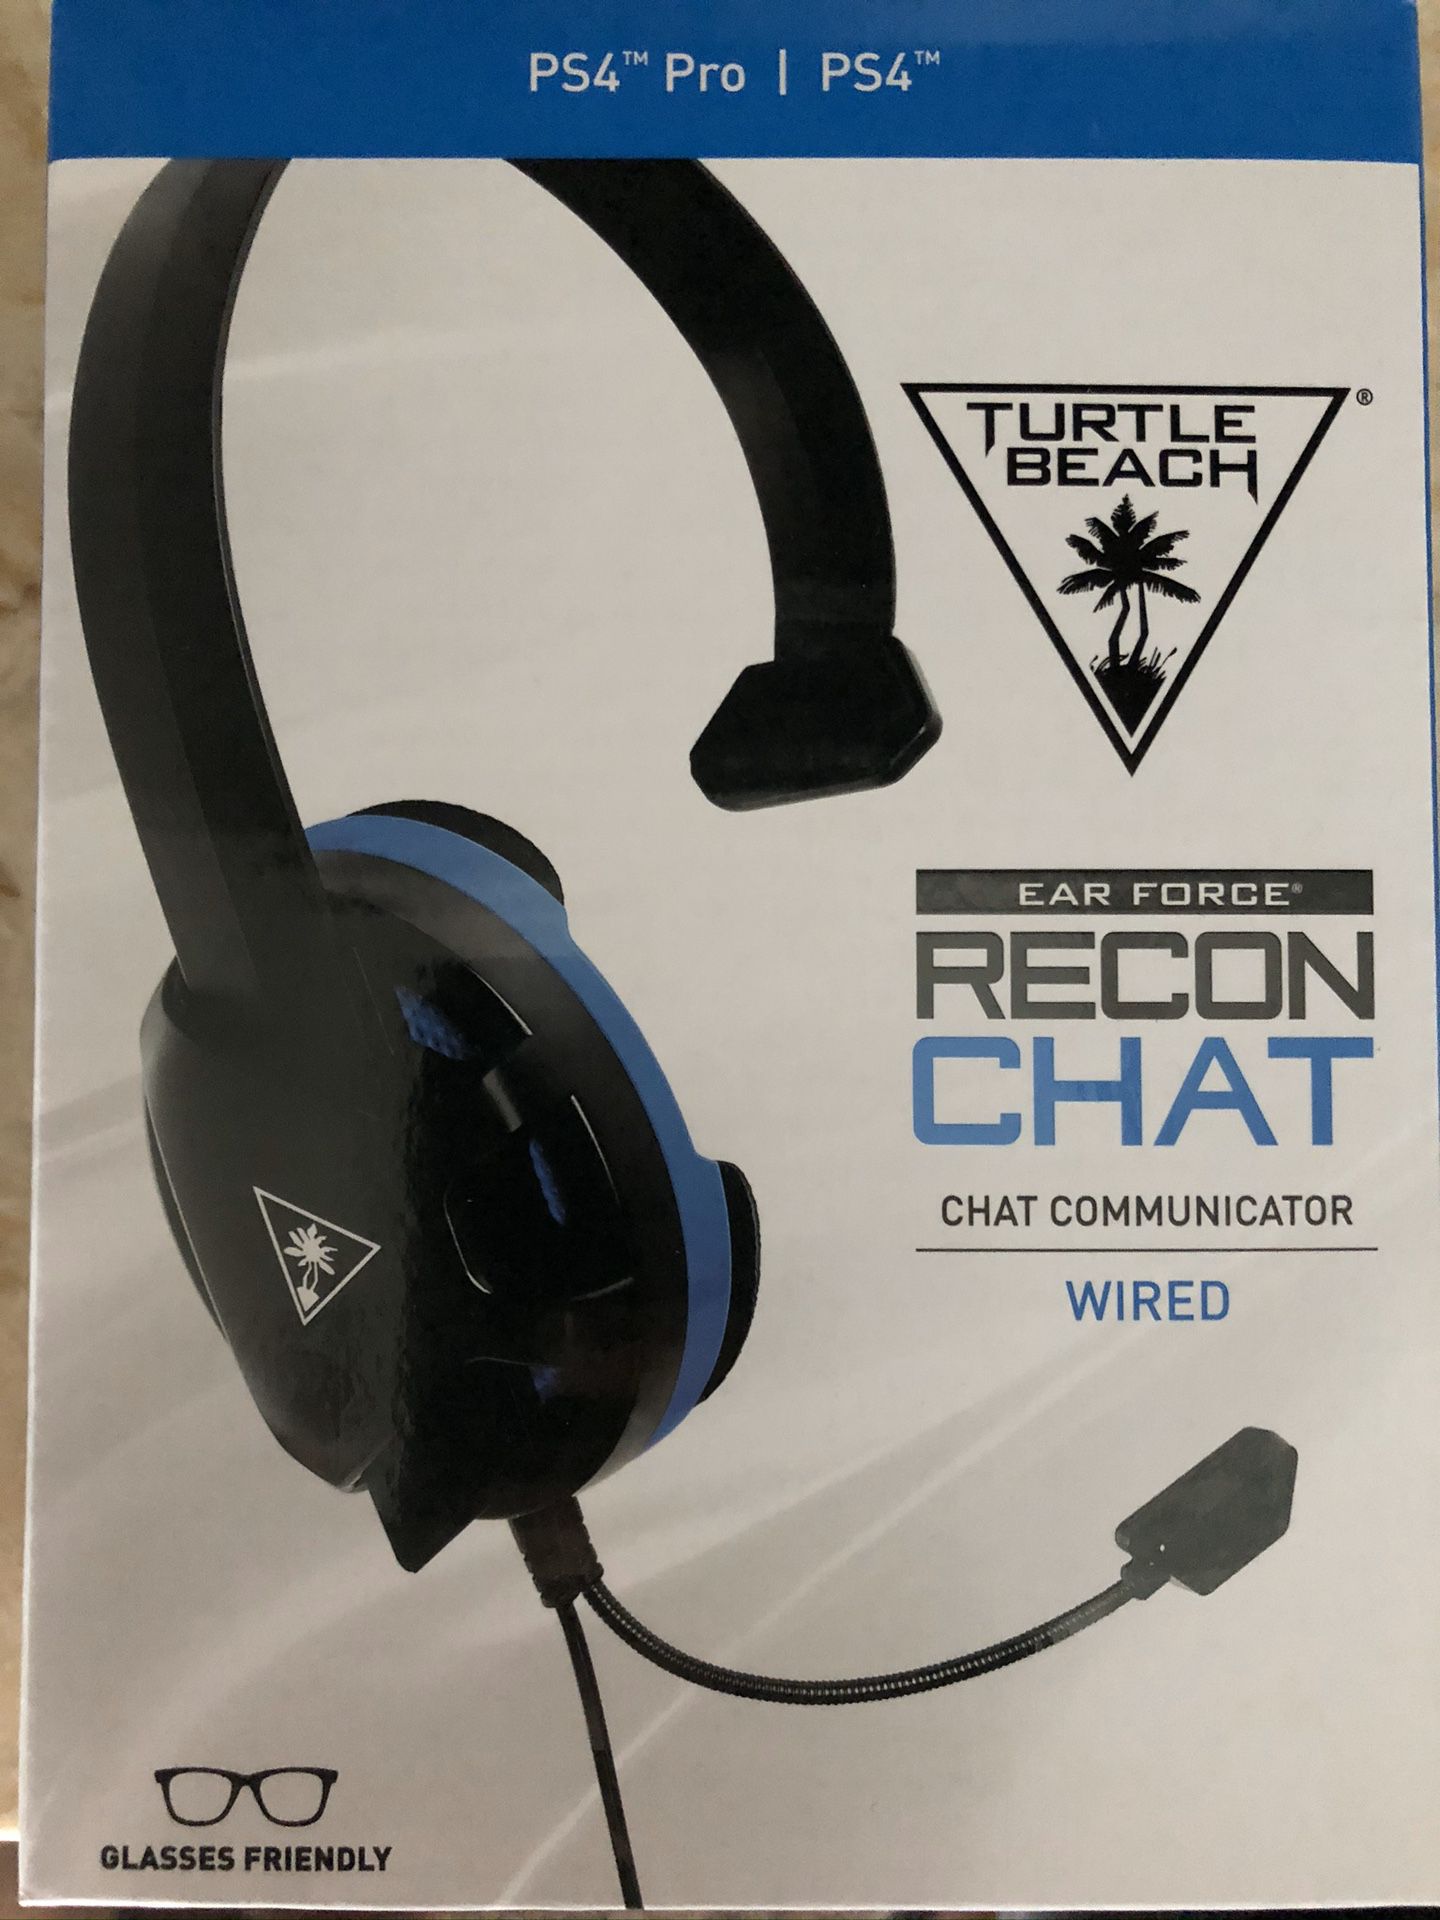 Turtle Beach Recon chat headset PS4